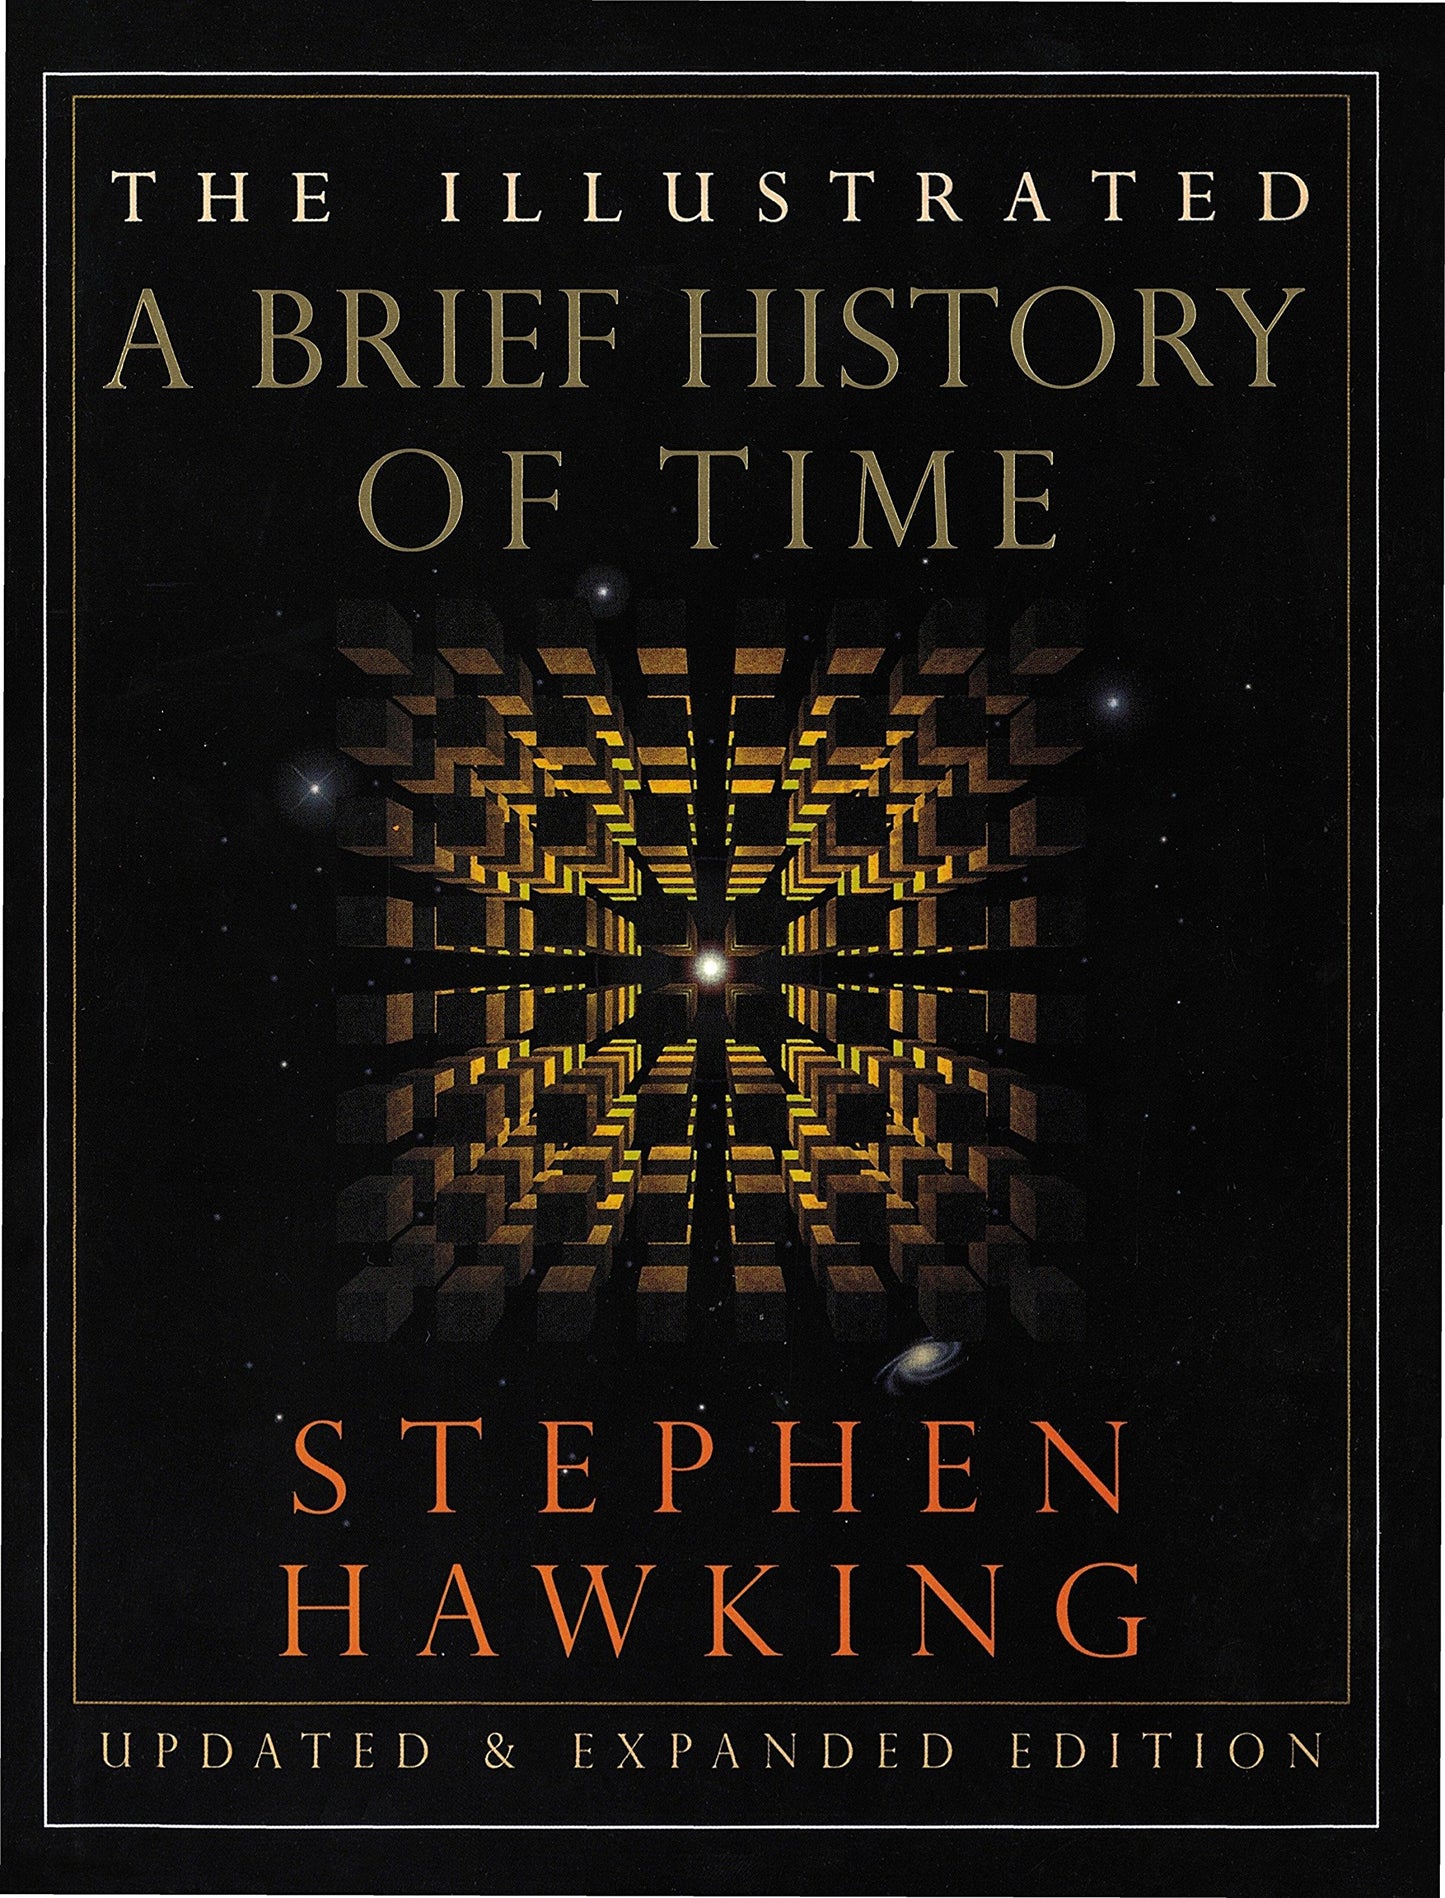 ILLUSTRATED BRIEF HISTORY OF TIME